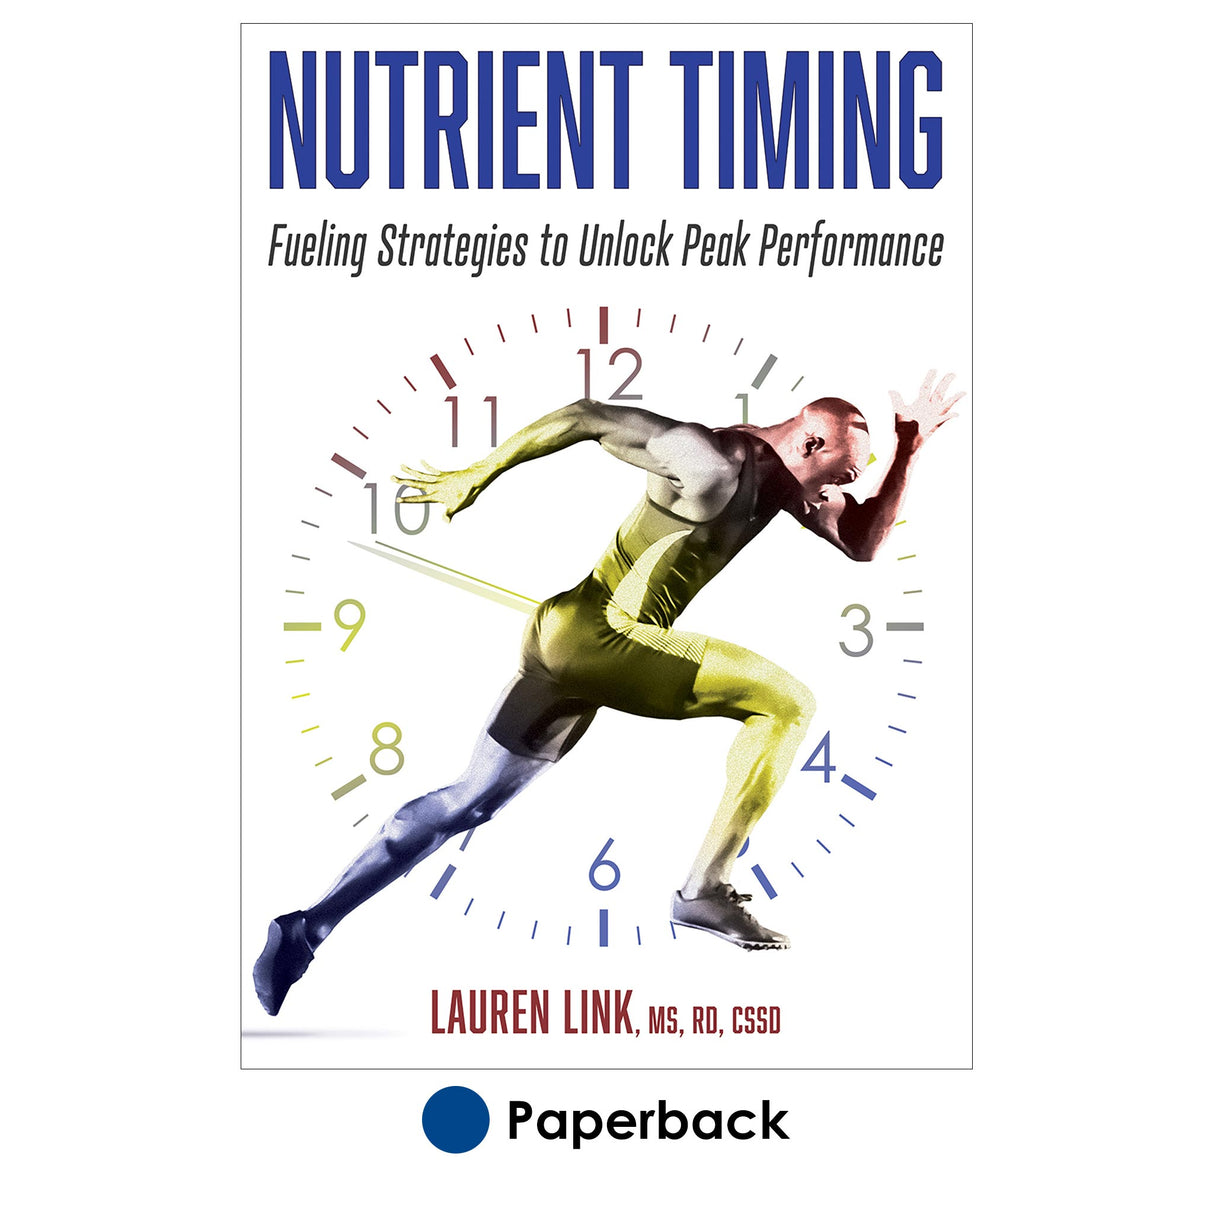 Nutrient Timing